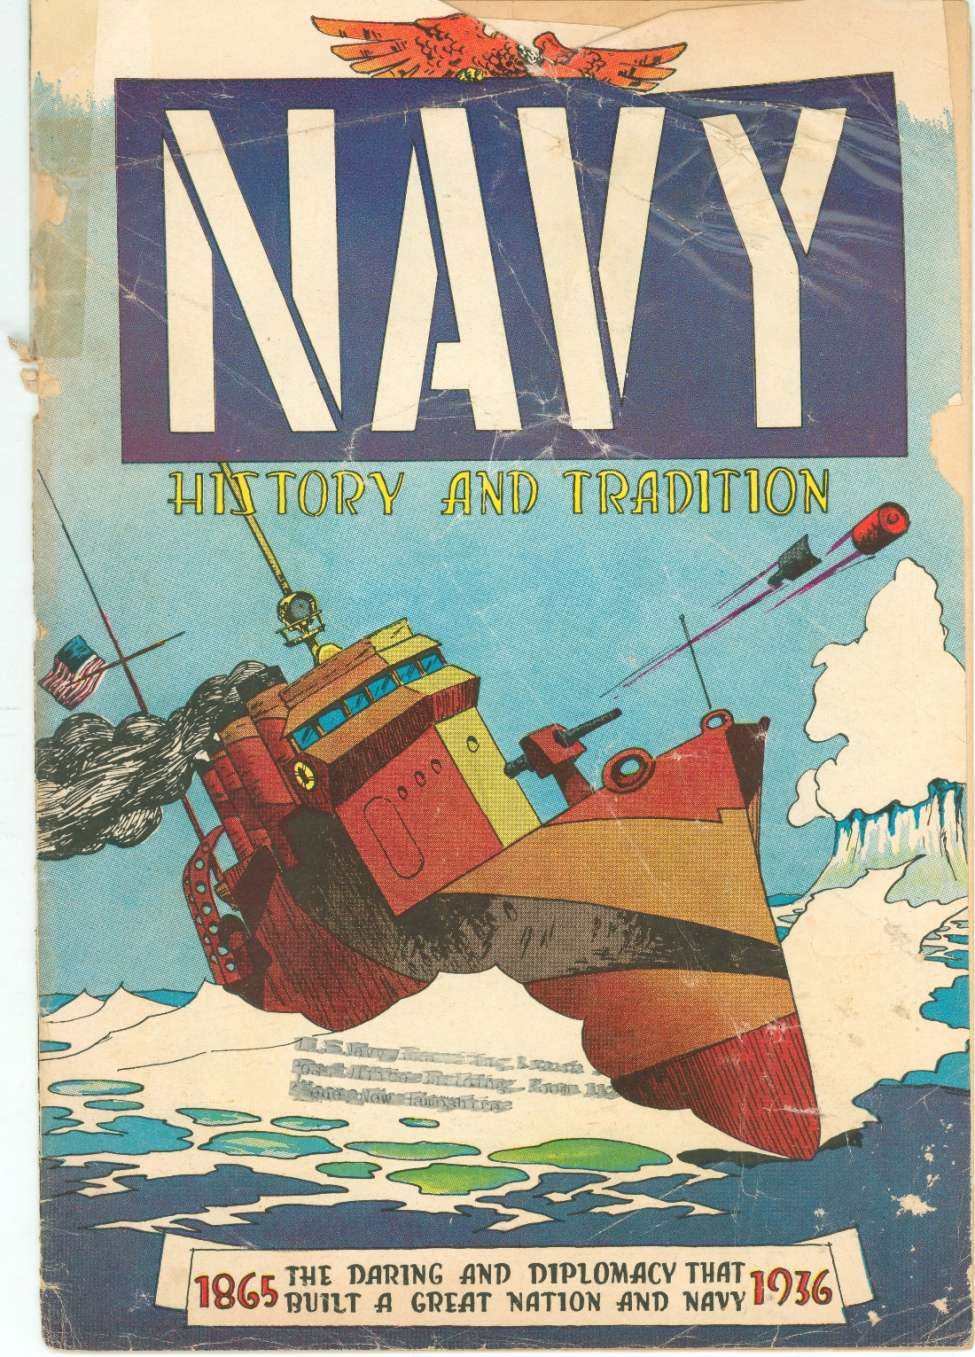 Book Cover For Navy History and Tradition 1865-1936